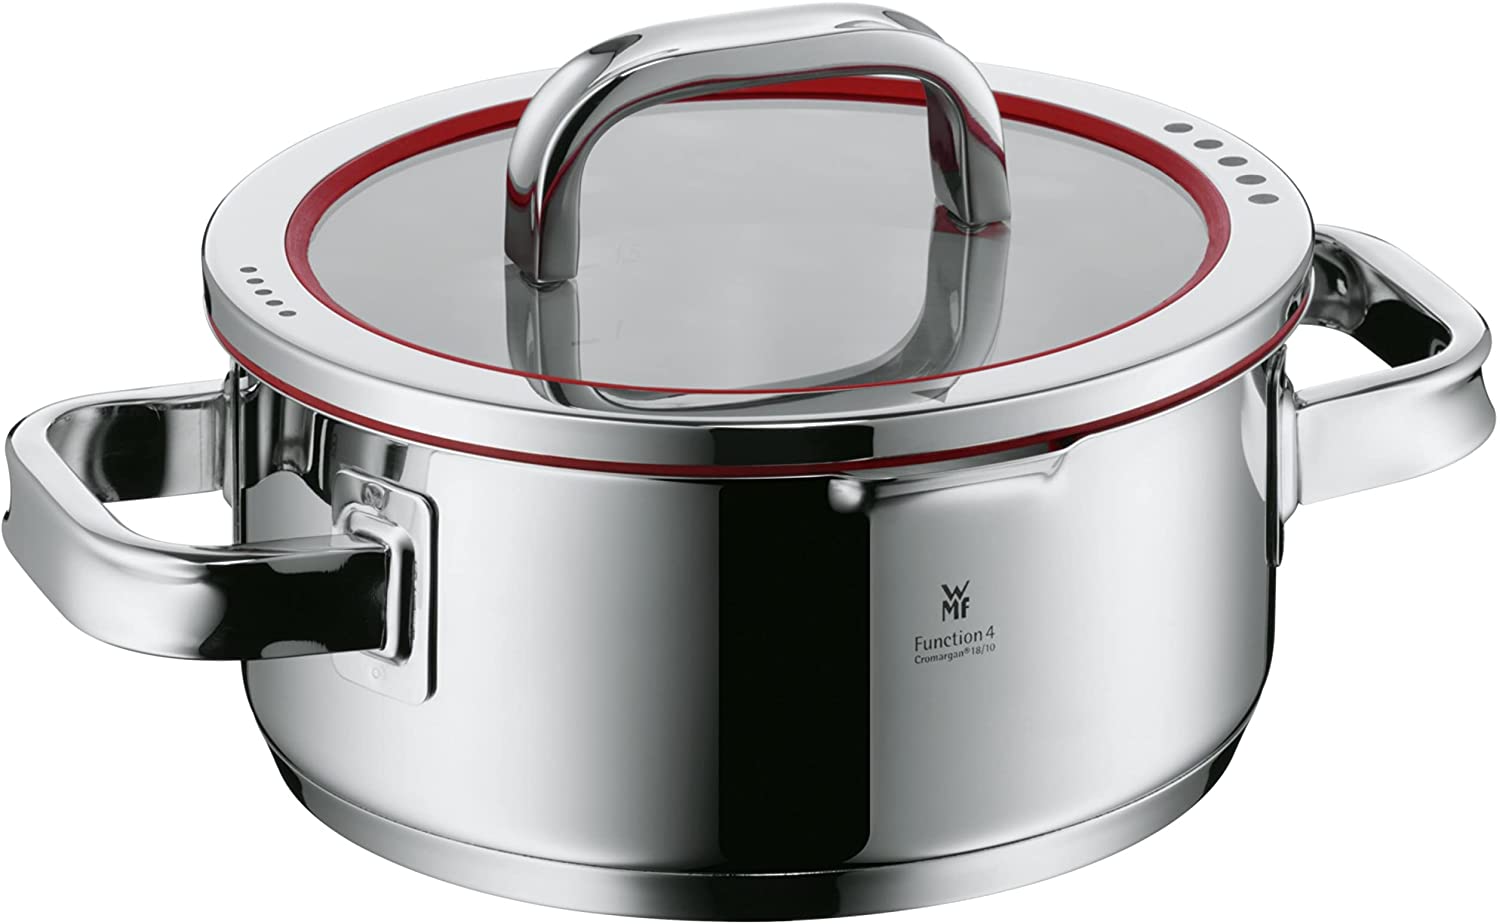 WMF cookware Ø 20 cm approx. 2,5l Function 4 Inside scaling lid - pour off or decant liquids without spilling to keep your dishes and cooker clean. Hollow side handles glass lid Cromargan stainless steel brushed suitable for all stove tops including induction dishwasher-safe